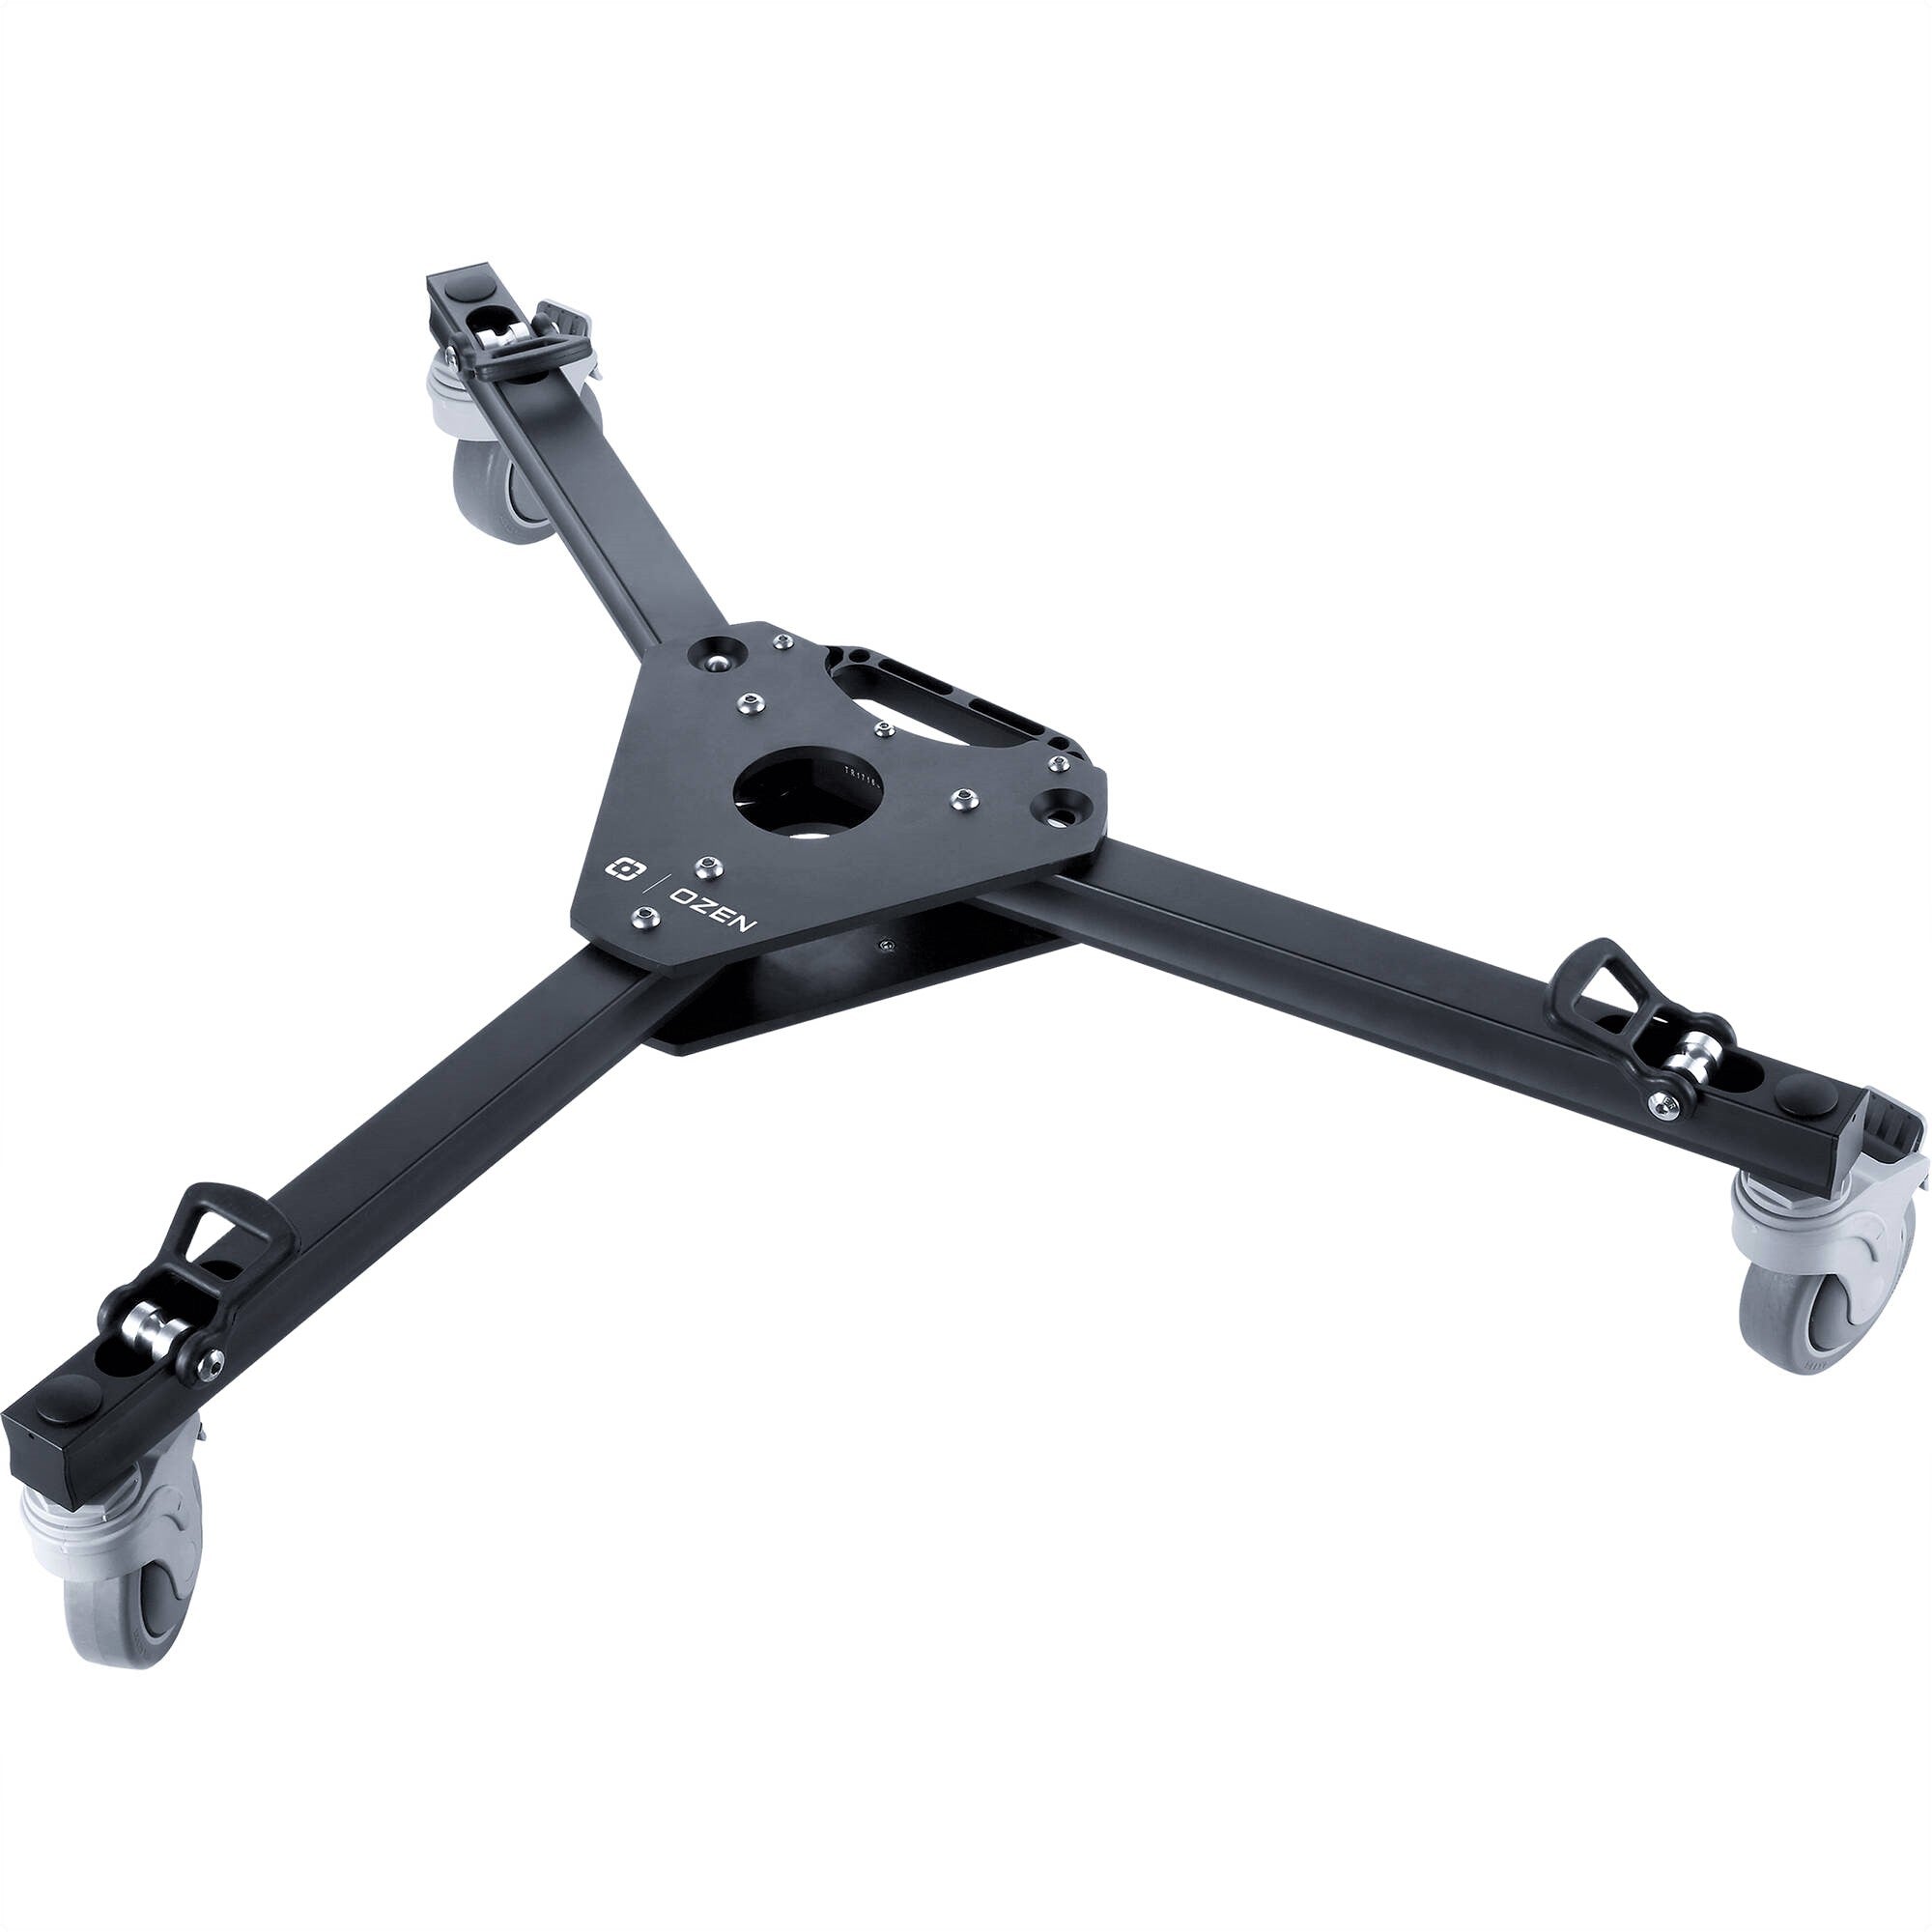 OZEN Heavy-Duty Tripod Dolly with Arc-Tracking Wheels & Cable Guards